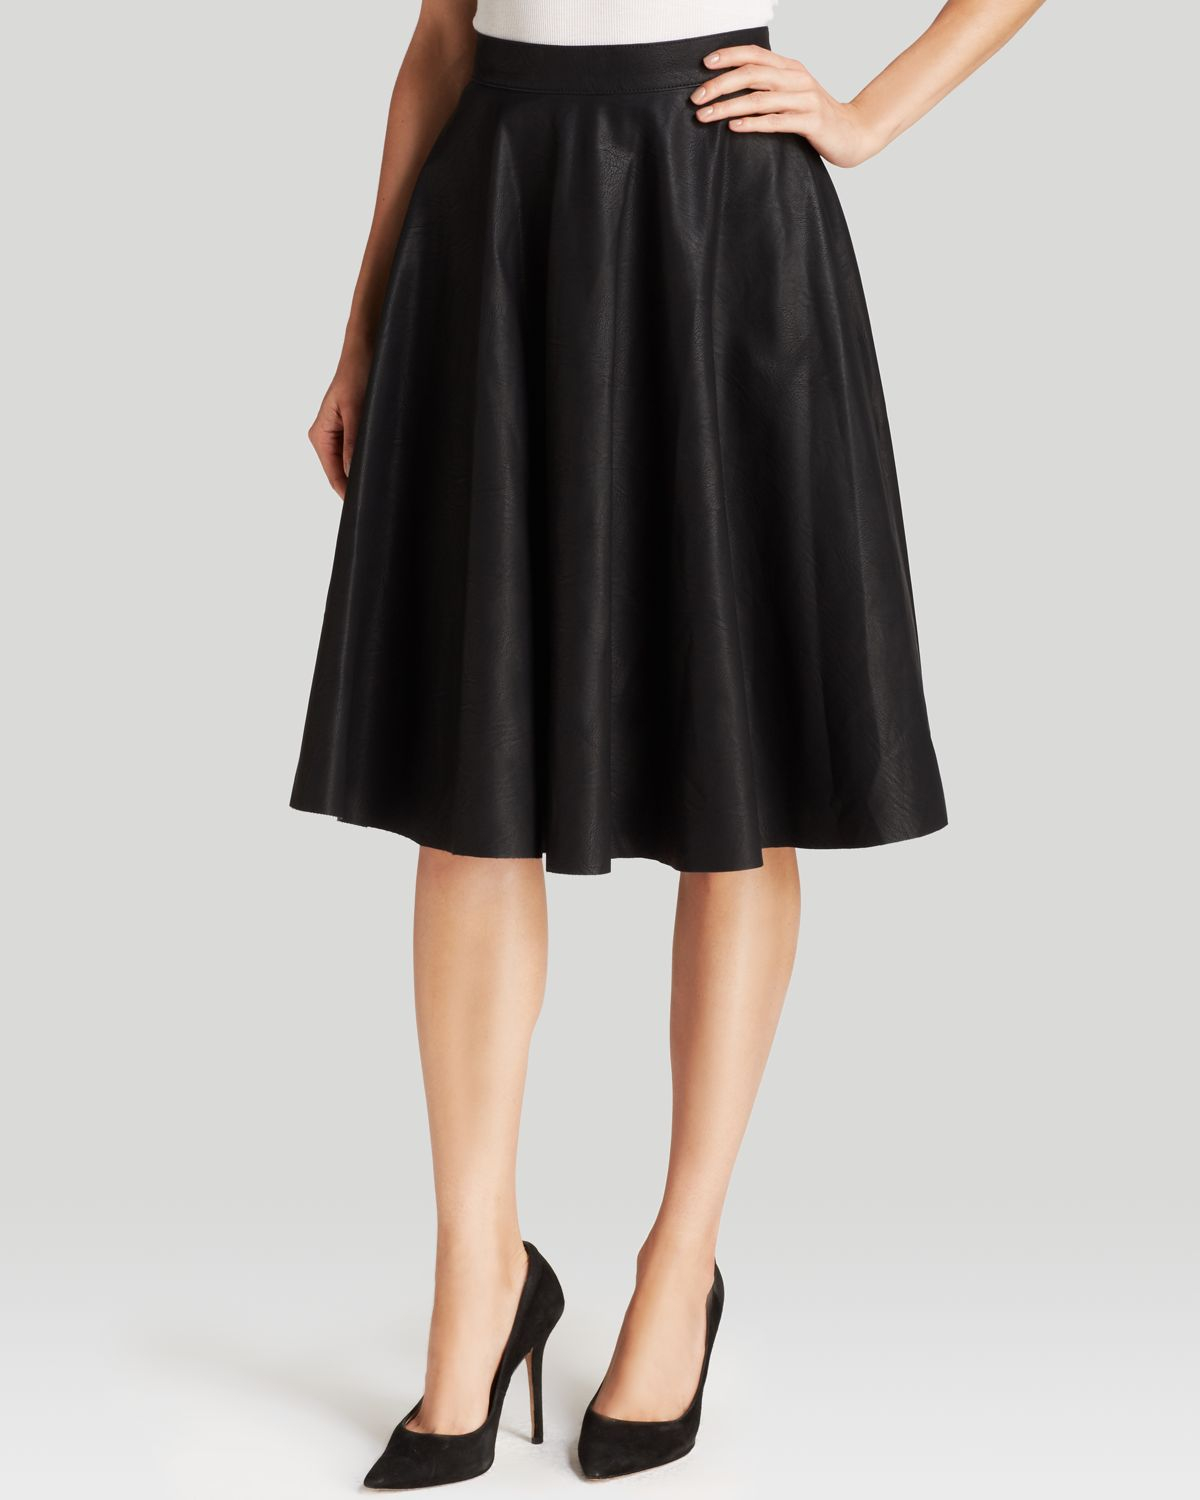 Lyst - French Connection Skirt - Faux Leather Flared in Black